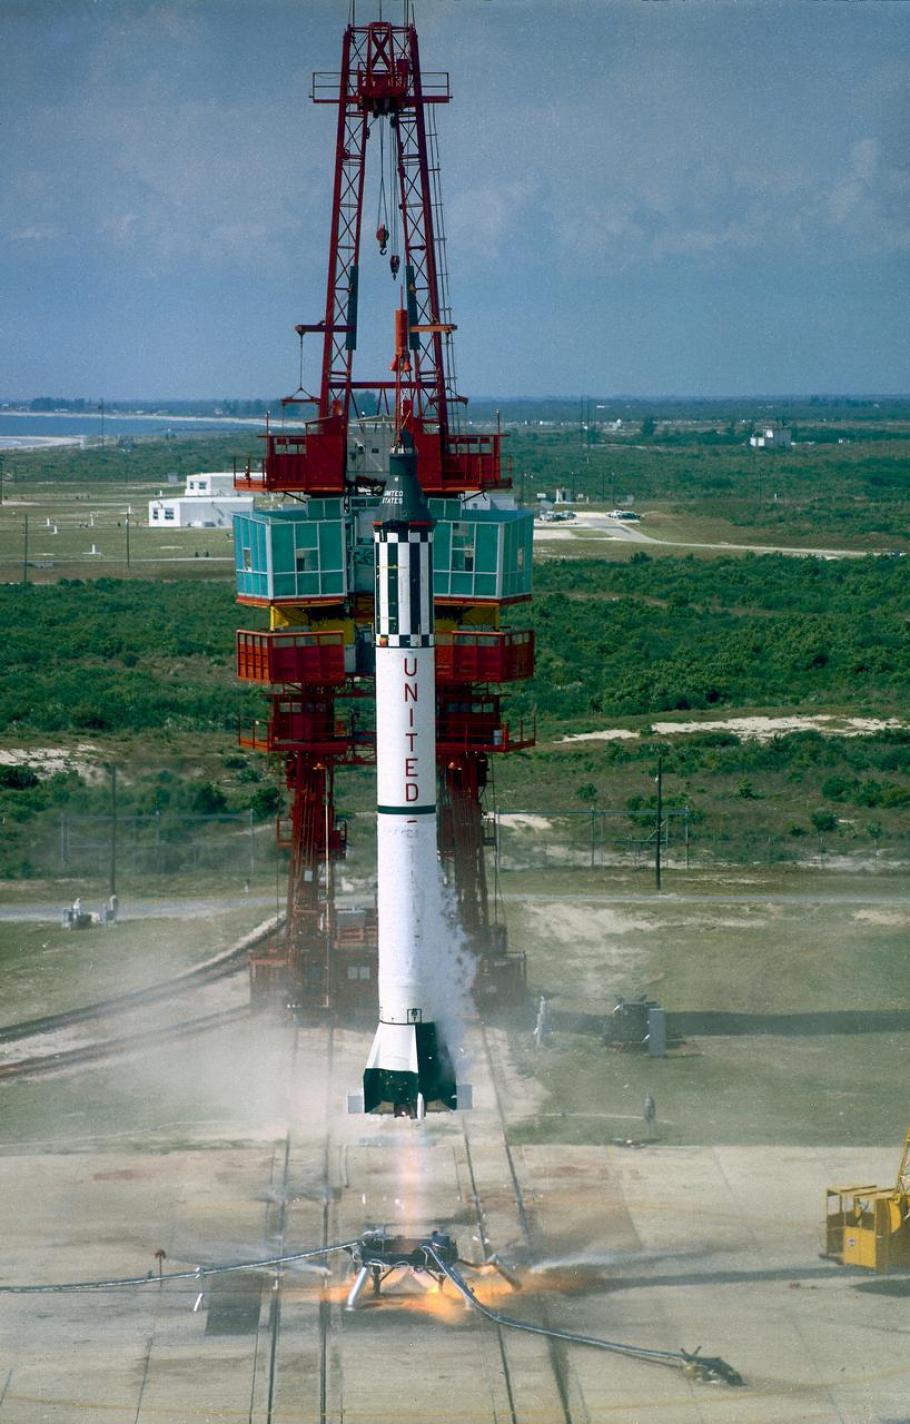 Mercury-Redstone (MR-3), with “Freedom 7” capsule, launches